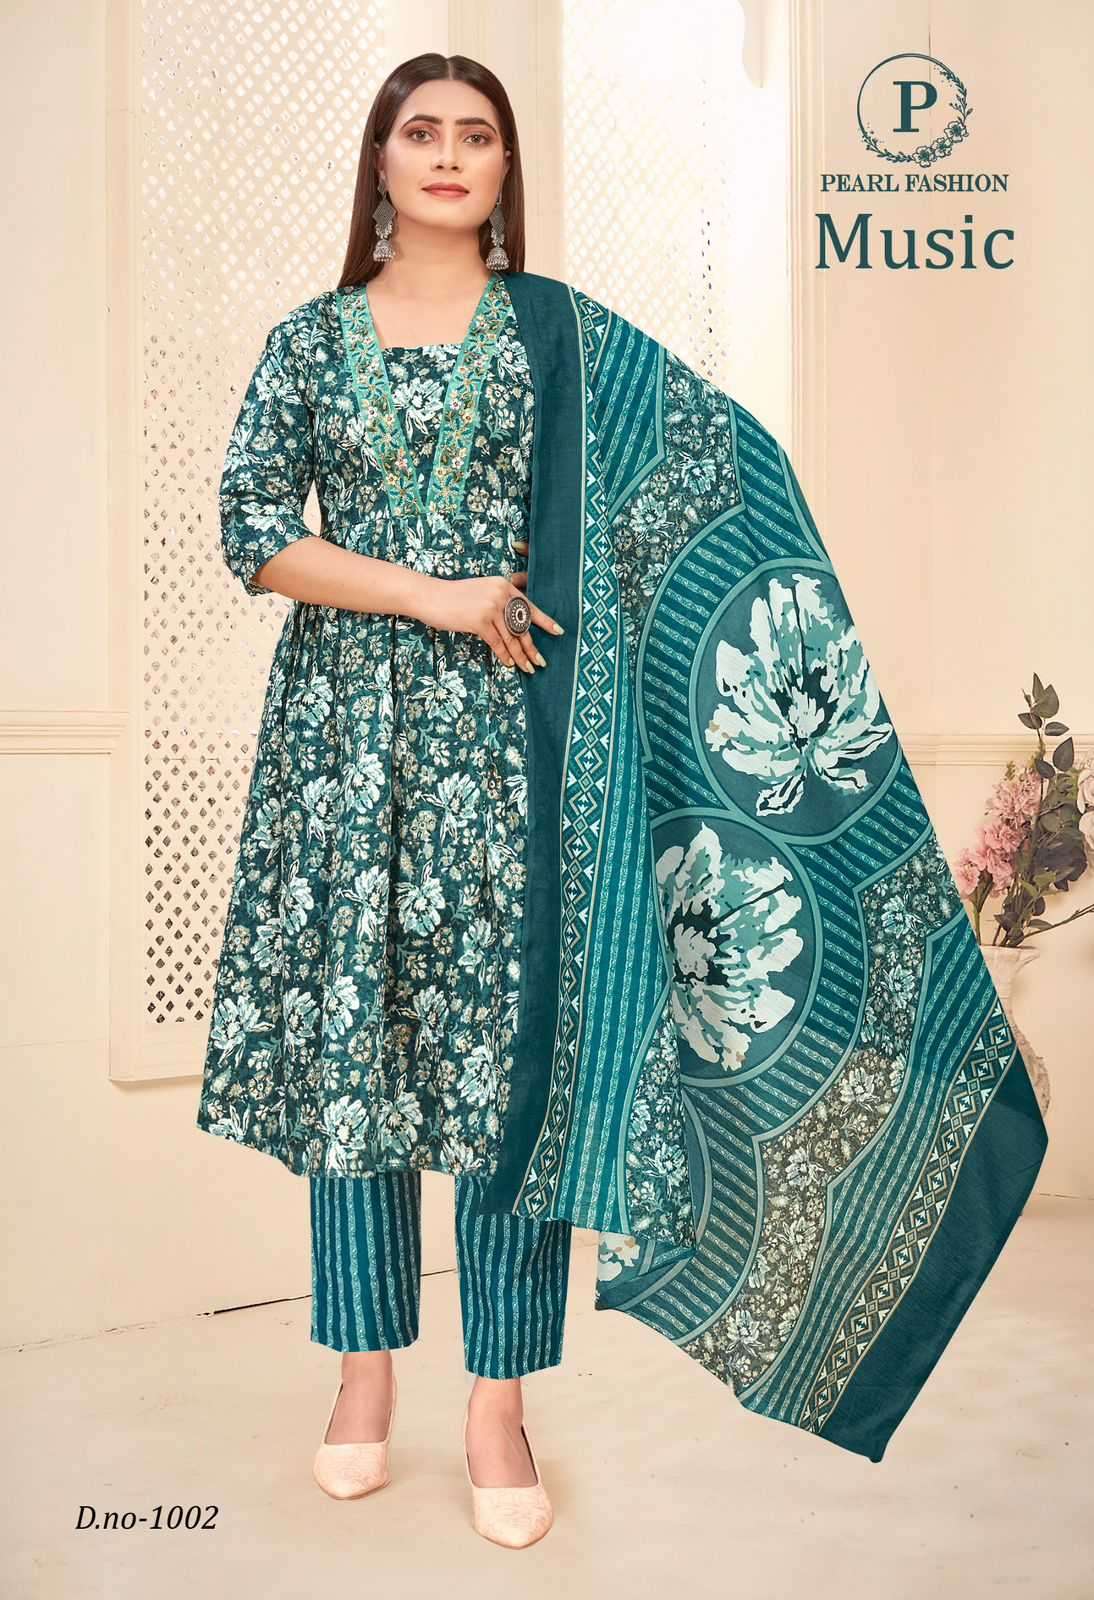 pearl music series 1001-1010 Chanderi Cotton readymade suit